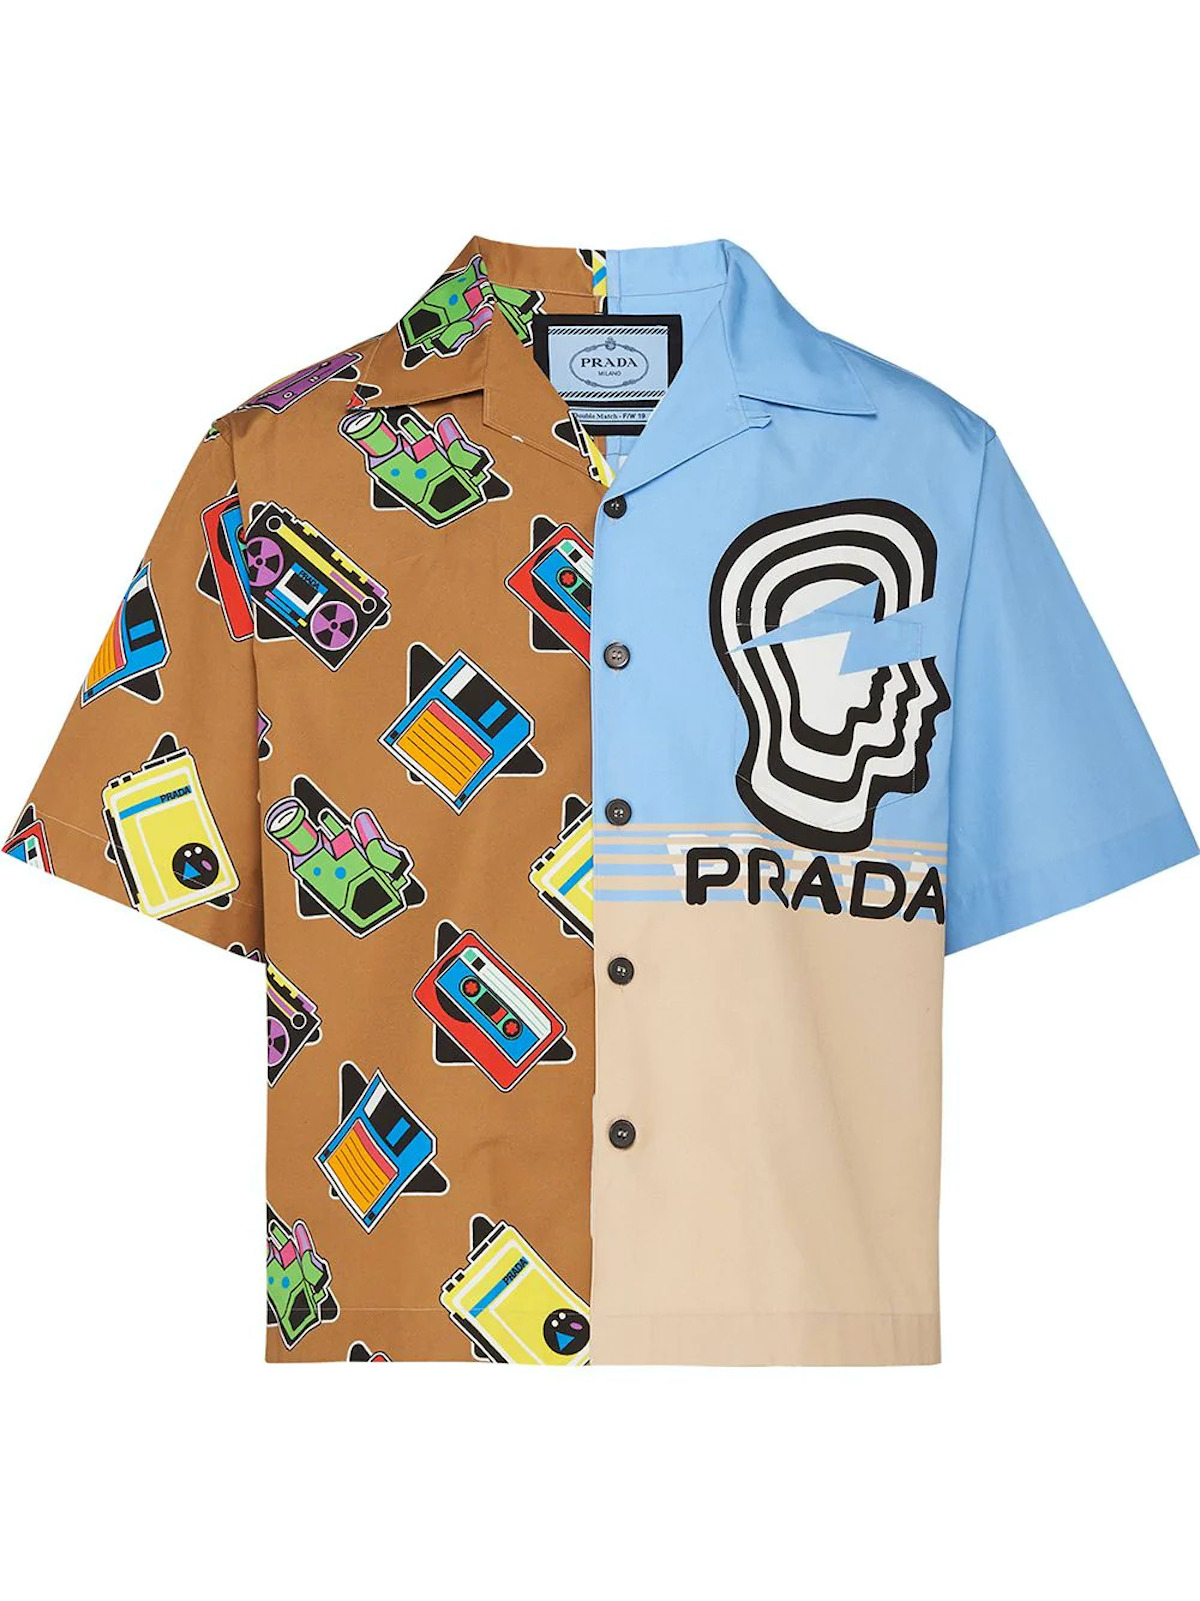 PRADA: The Bowling Shirt Taking Over the Game – PAUSE Online